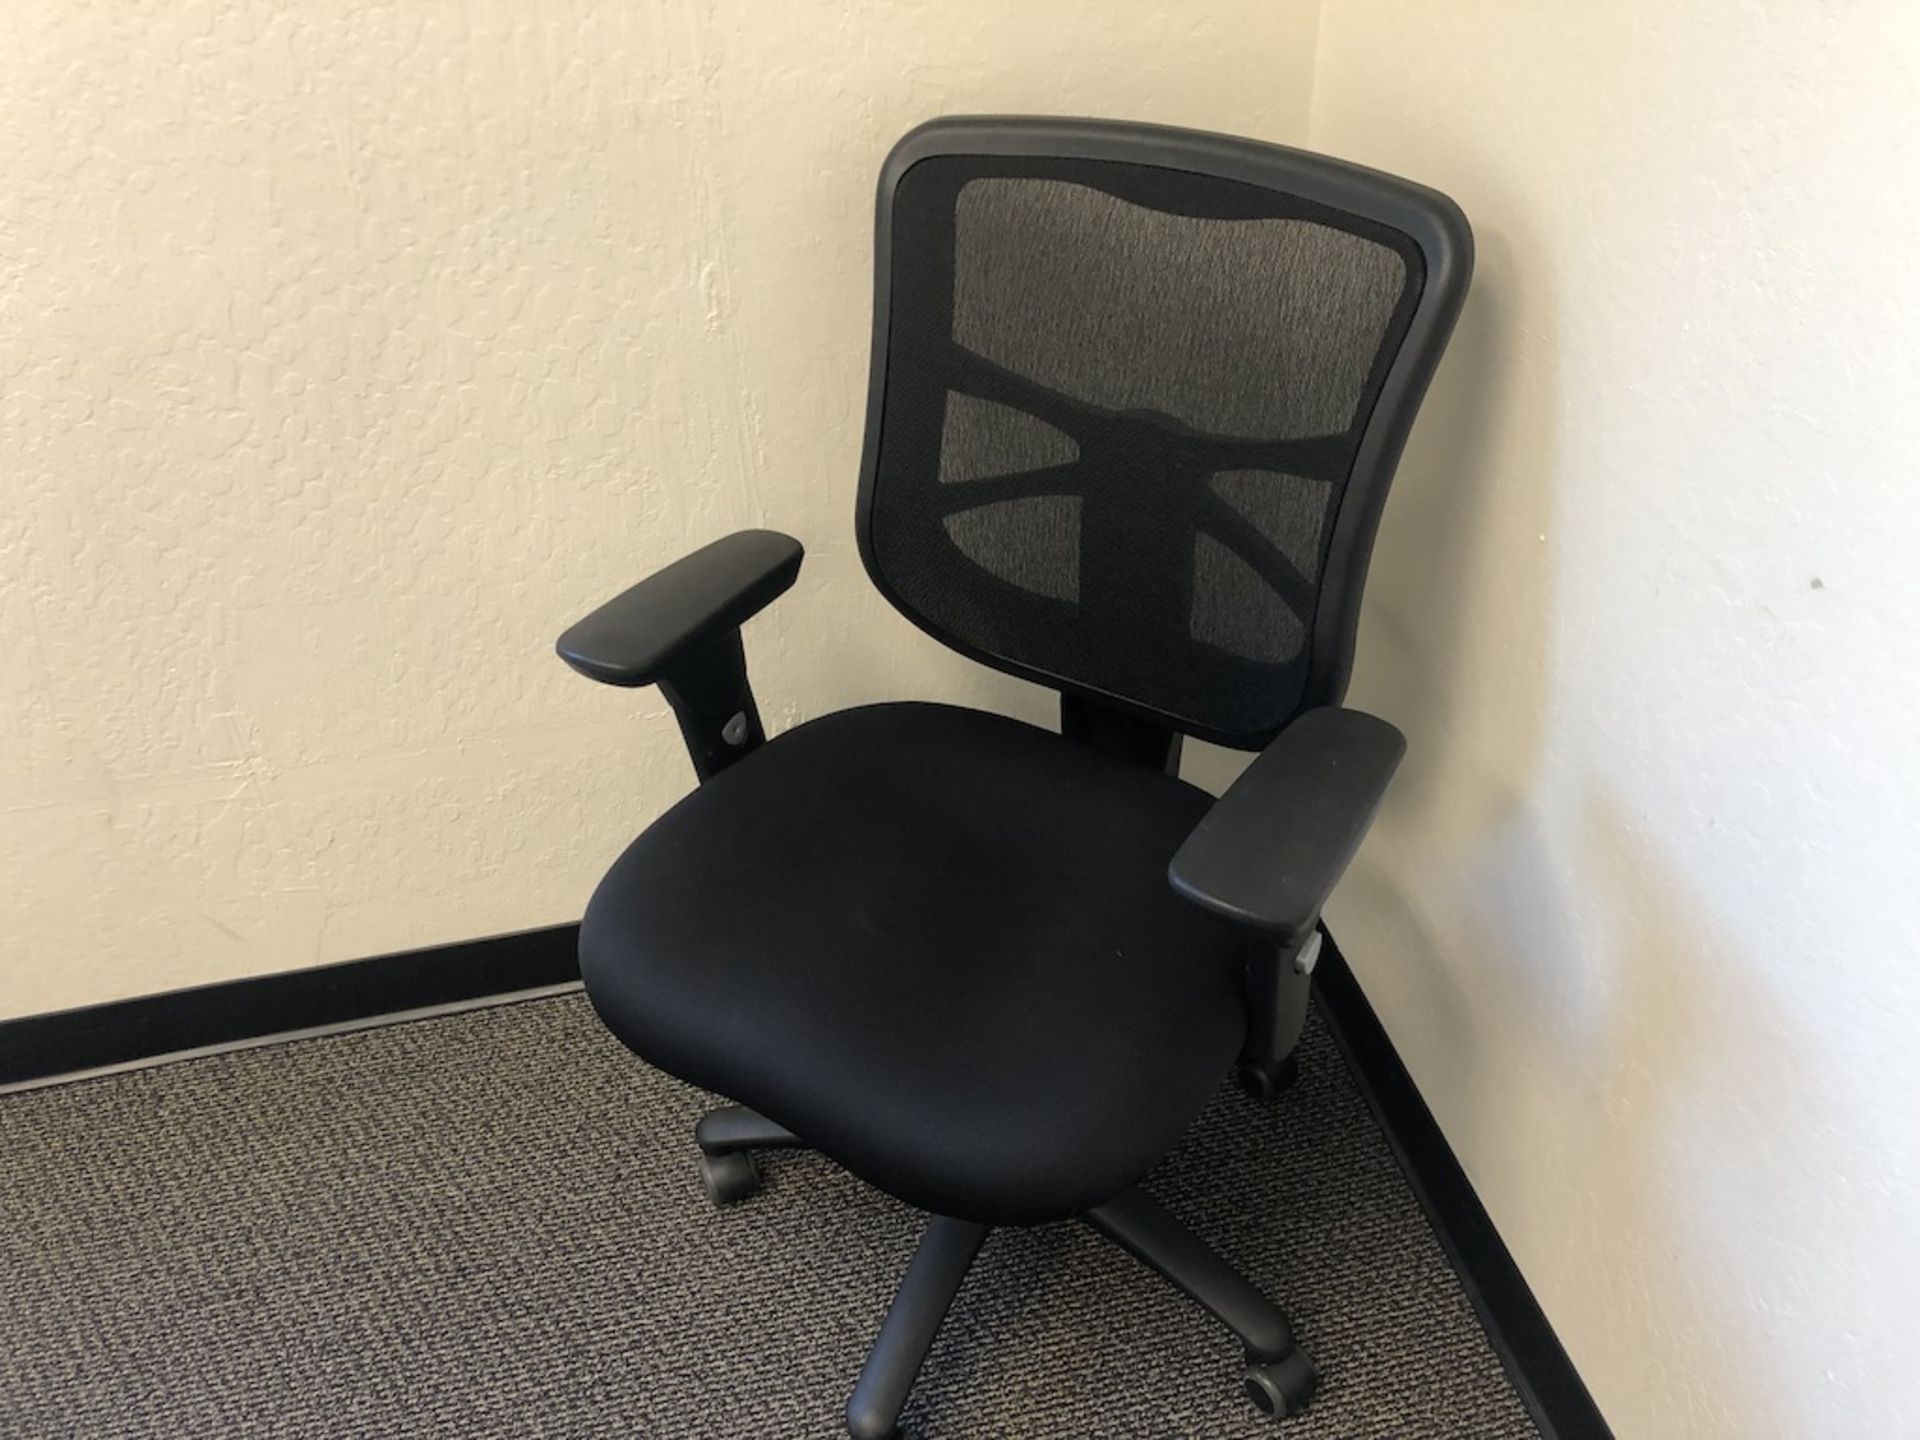 5 CASTER OFFICE CHAIR PADDED ARM REST, BLACK SEAT CUSHION, MESH BACK SUPPORT   SCHNEIDER ELECTRIC- - Image 3 of 3